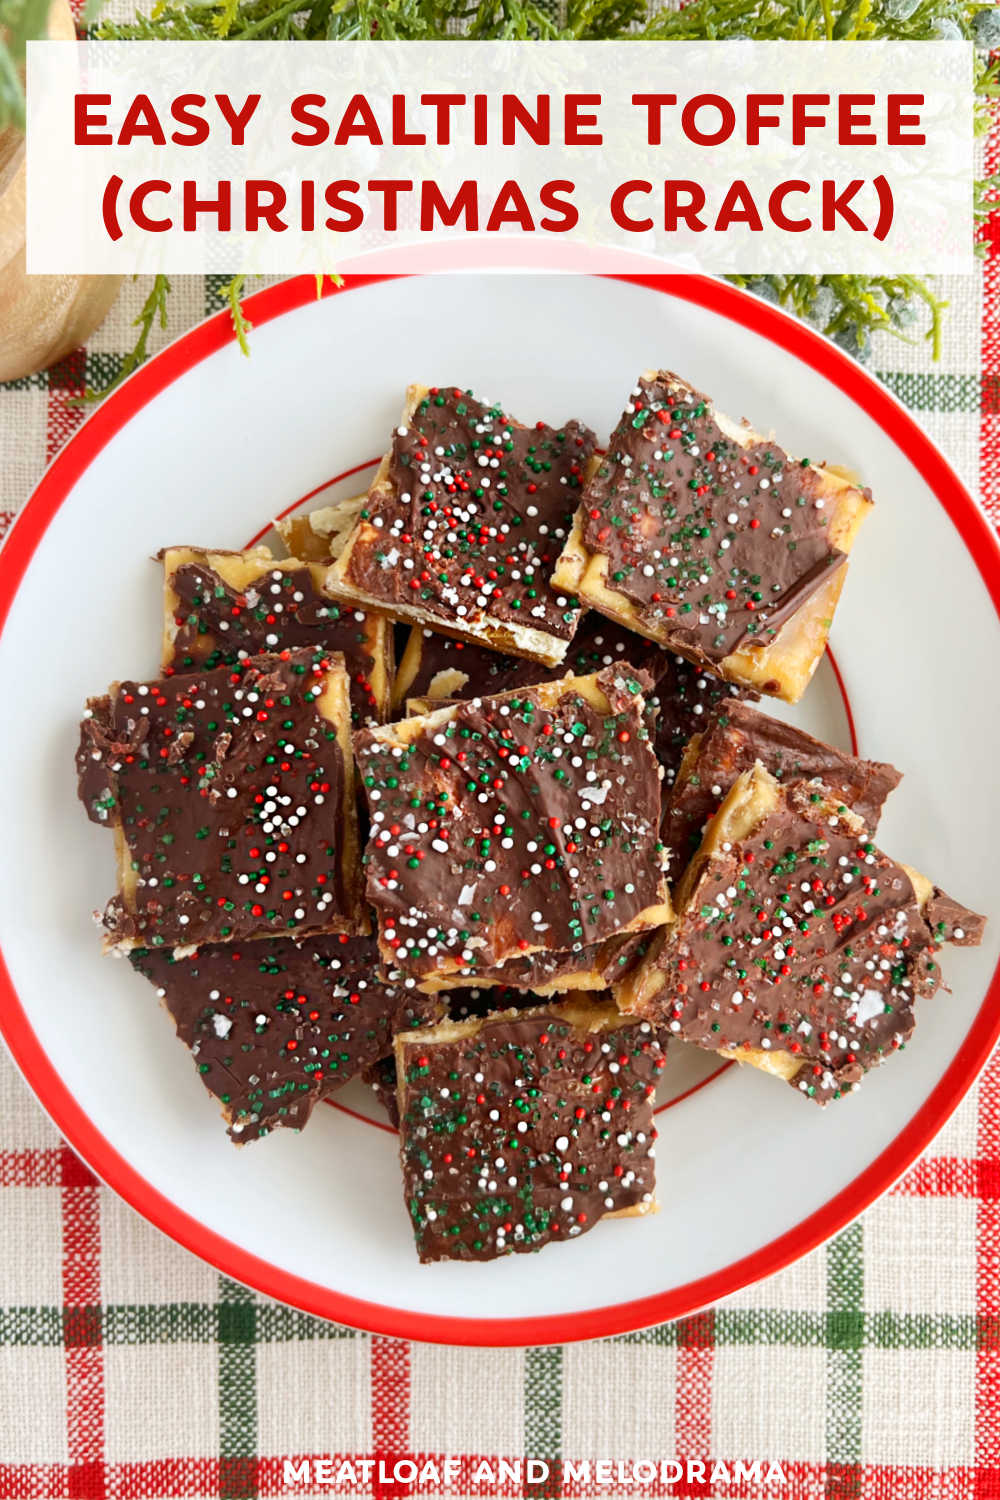 This Easy Saltine Toffee recipe is Saltine crackers with buttery toffee and chocolate. A sweet, salty, easy treat perfect for the holiday season. This easy candy recipe is so delicious, some folks call it Christmas Crack! via @meamel